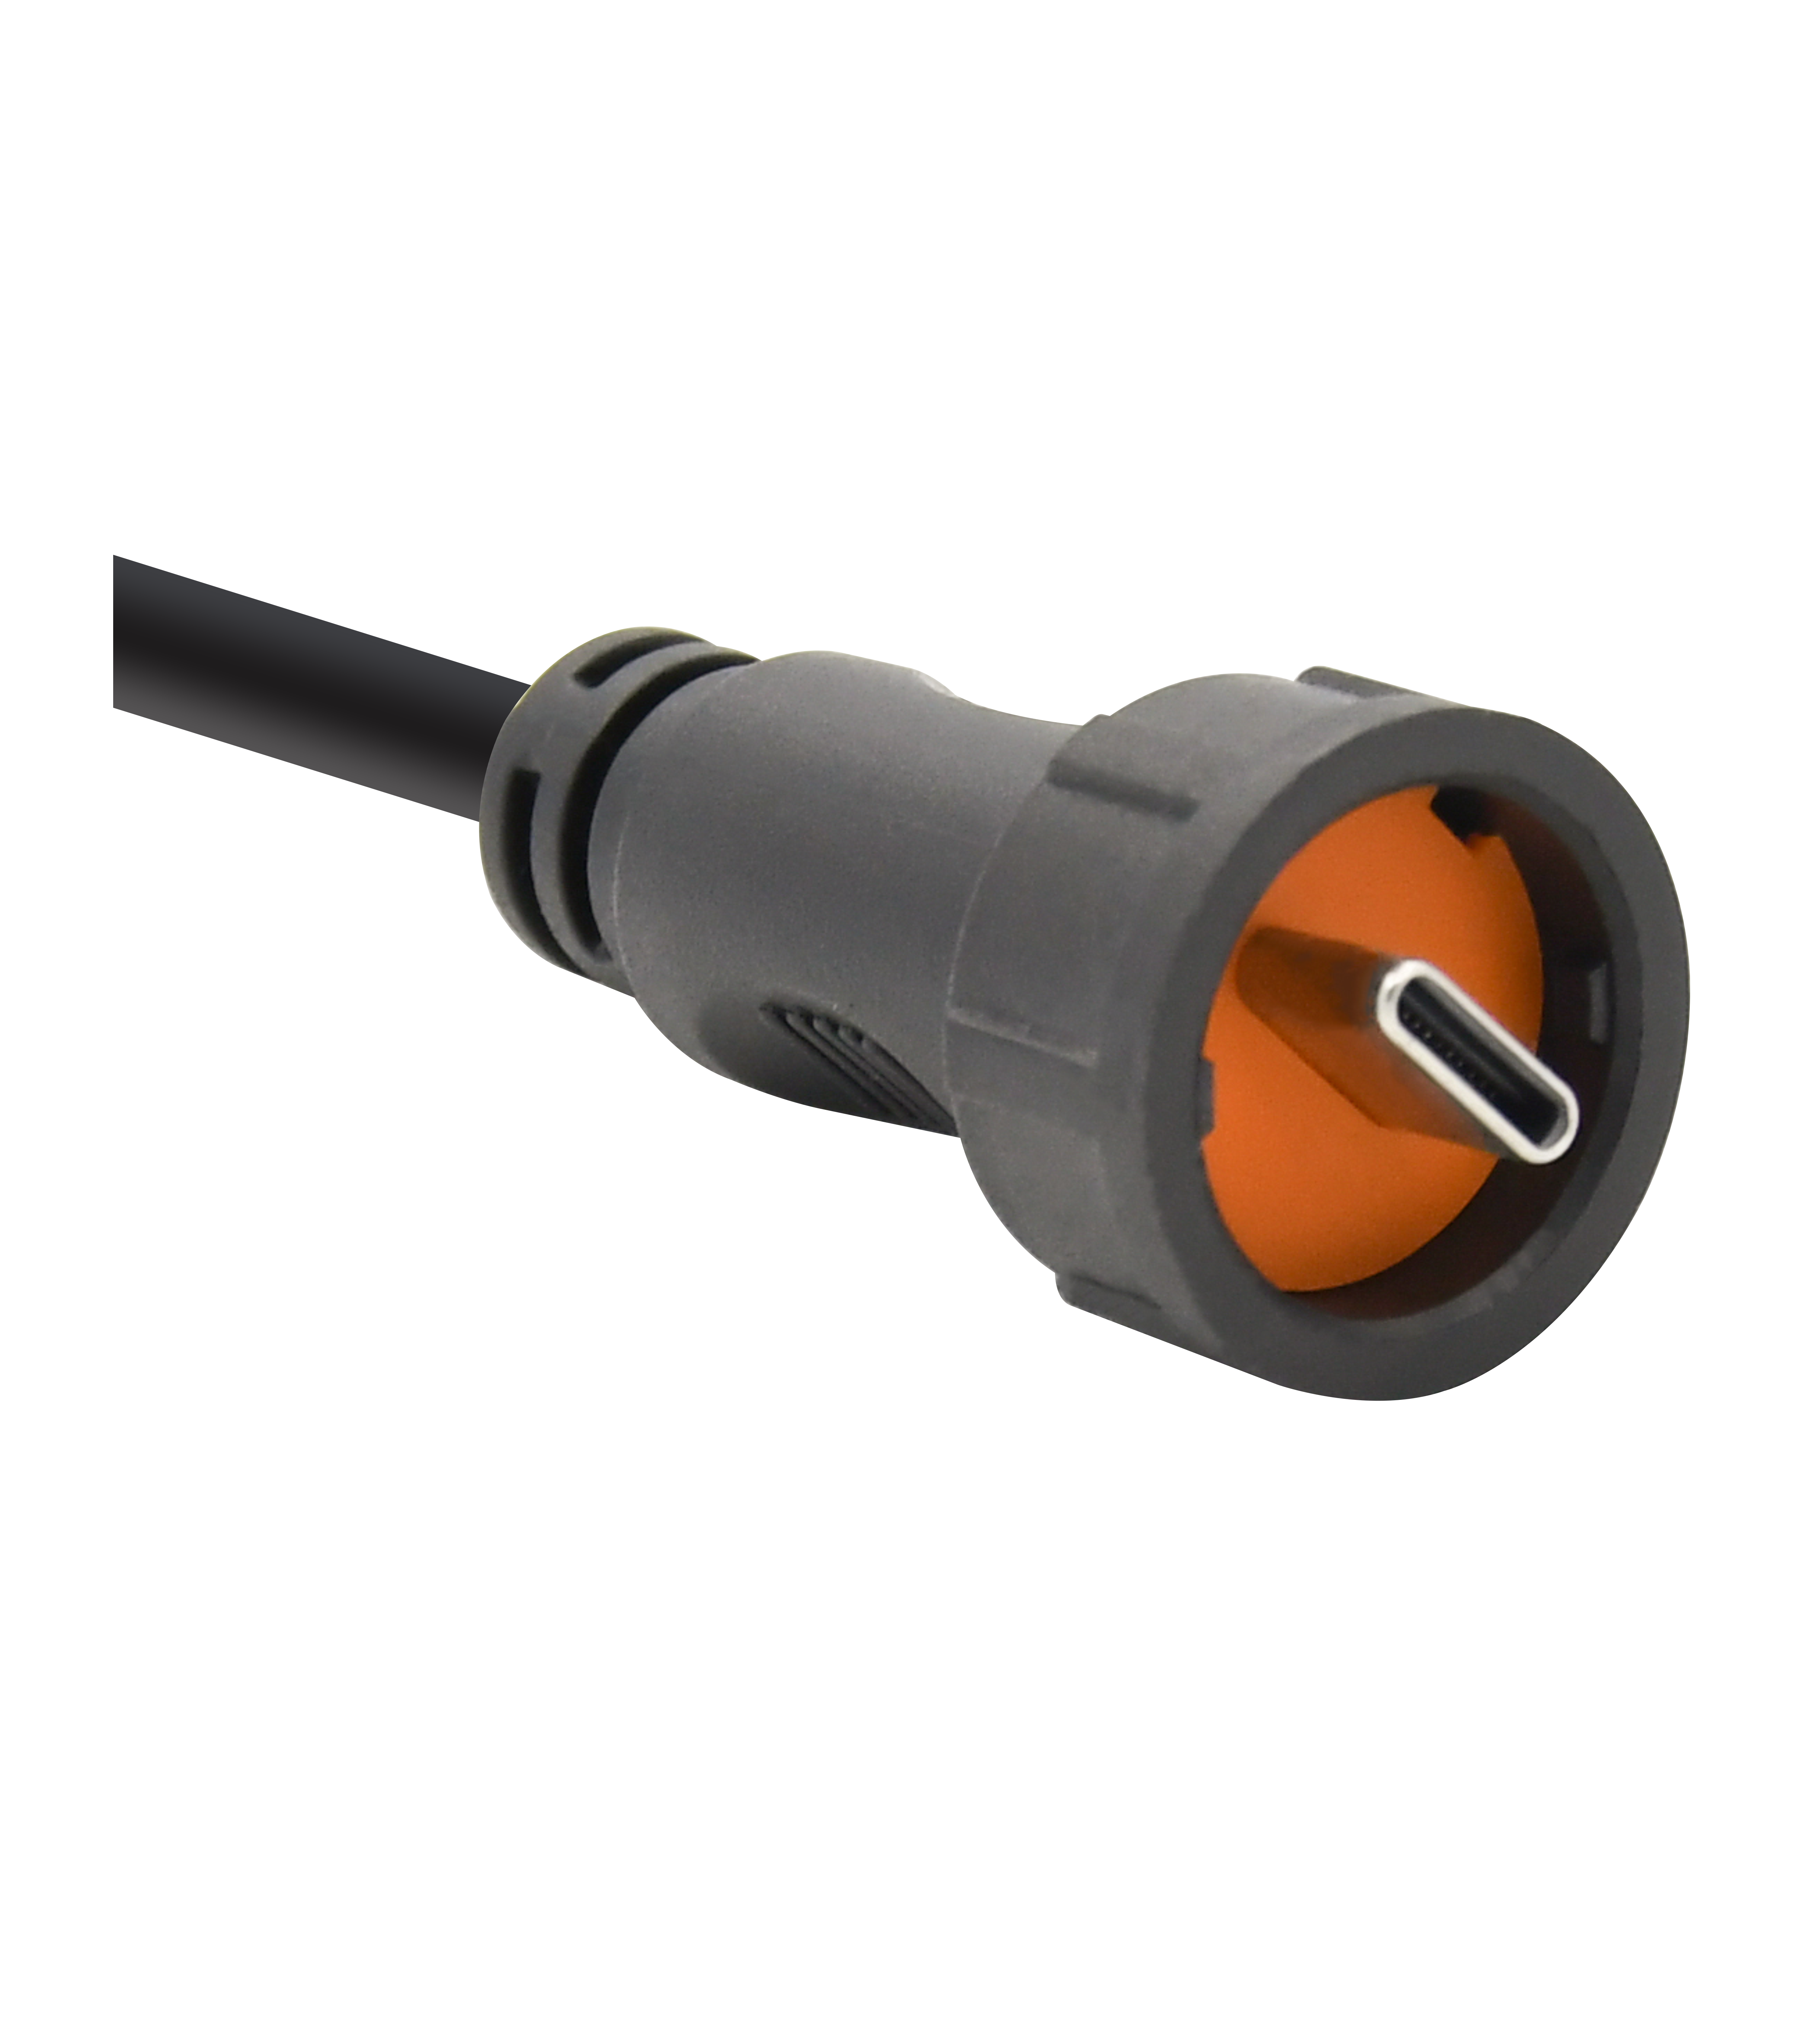 Rigoal USB Connectors: Premier Solutions for Industrial Needs